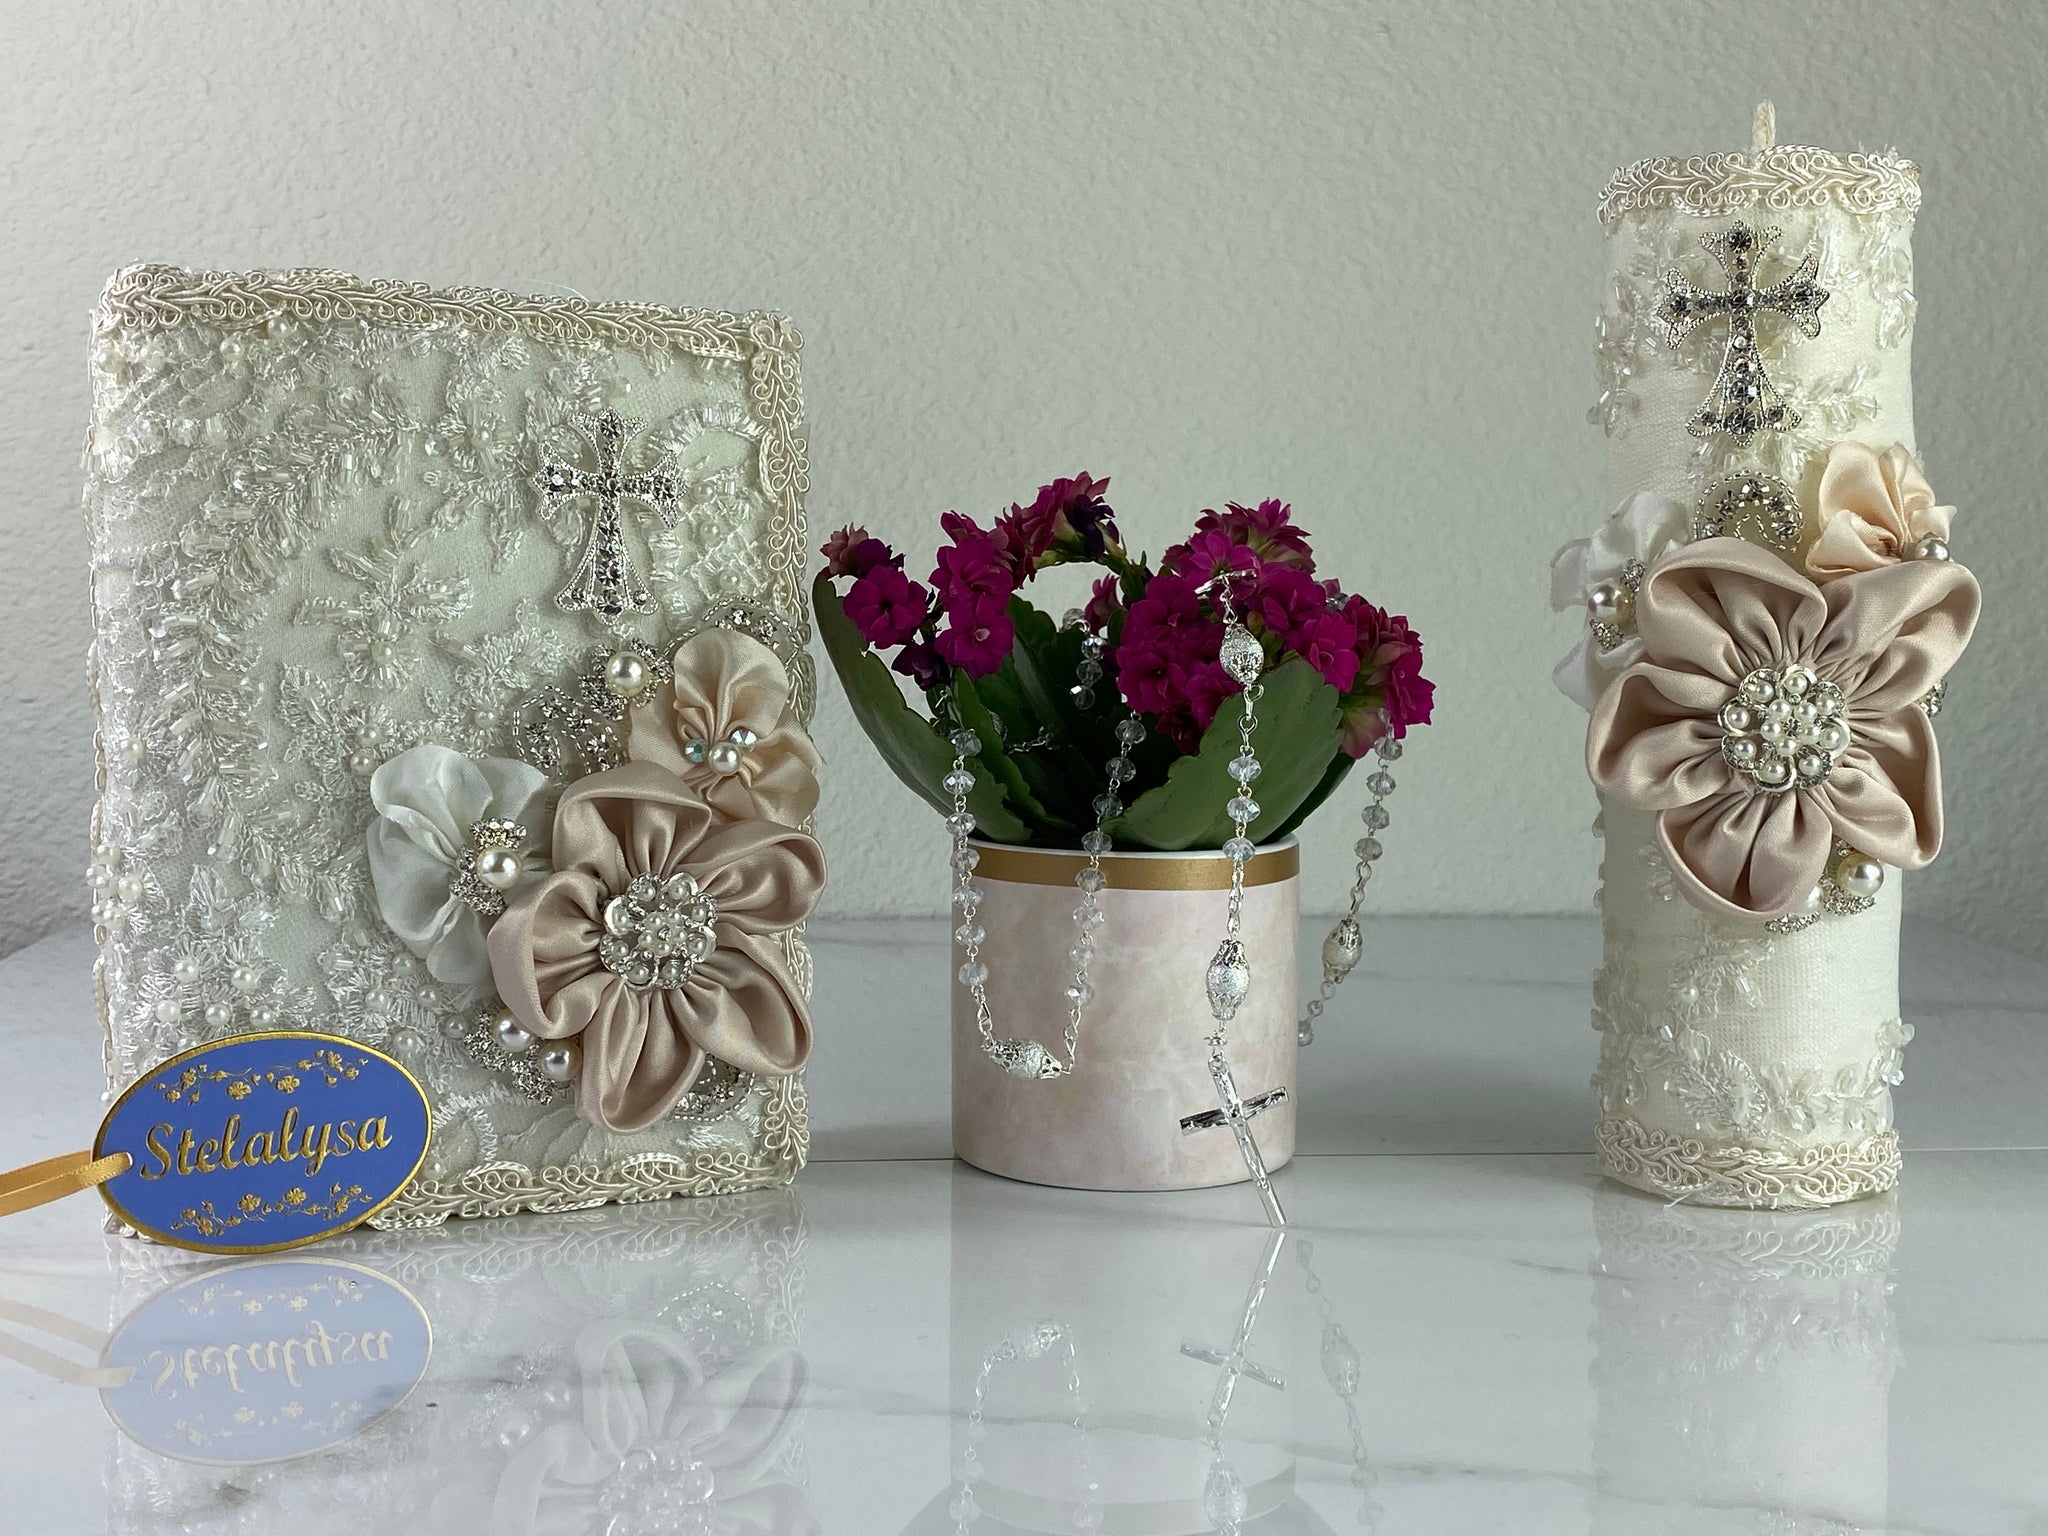 This ivory Bible Set - candle and bible is handmade and made using satin and lace.  It is elegantly designed with pearls, crystals, flowers in different pastel colors, and beads.  Each piece has a beautifully placed cross.  An elegant rosary complements this set.  The candle is cylinder in shape.  The rosary is 16.5 in. long and Bible is 6.5 in. by 4.5 in. and the candles approximately the same height.  The Bible includes the Old and New Testament in English. 